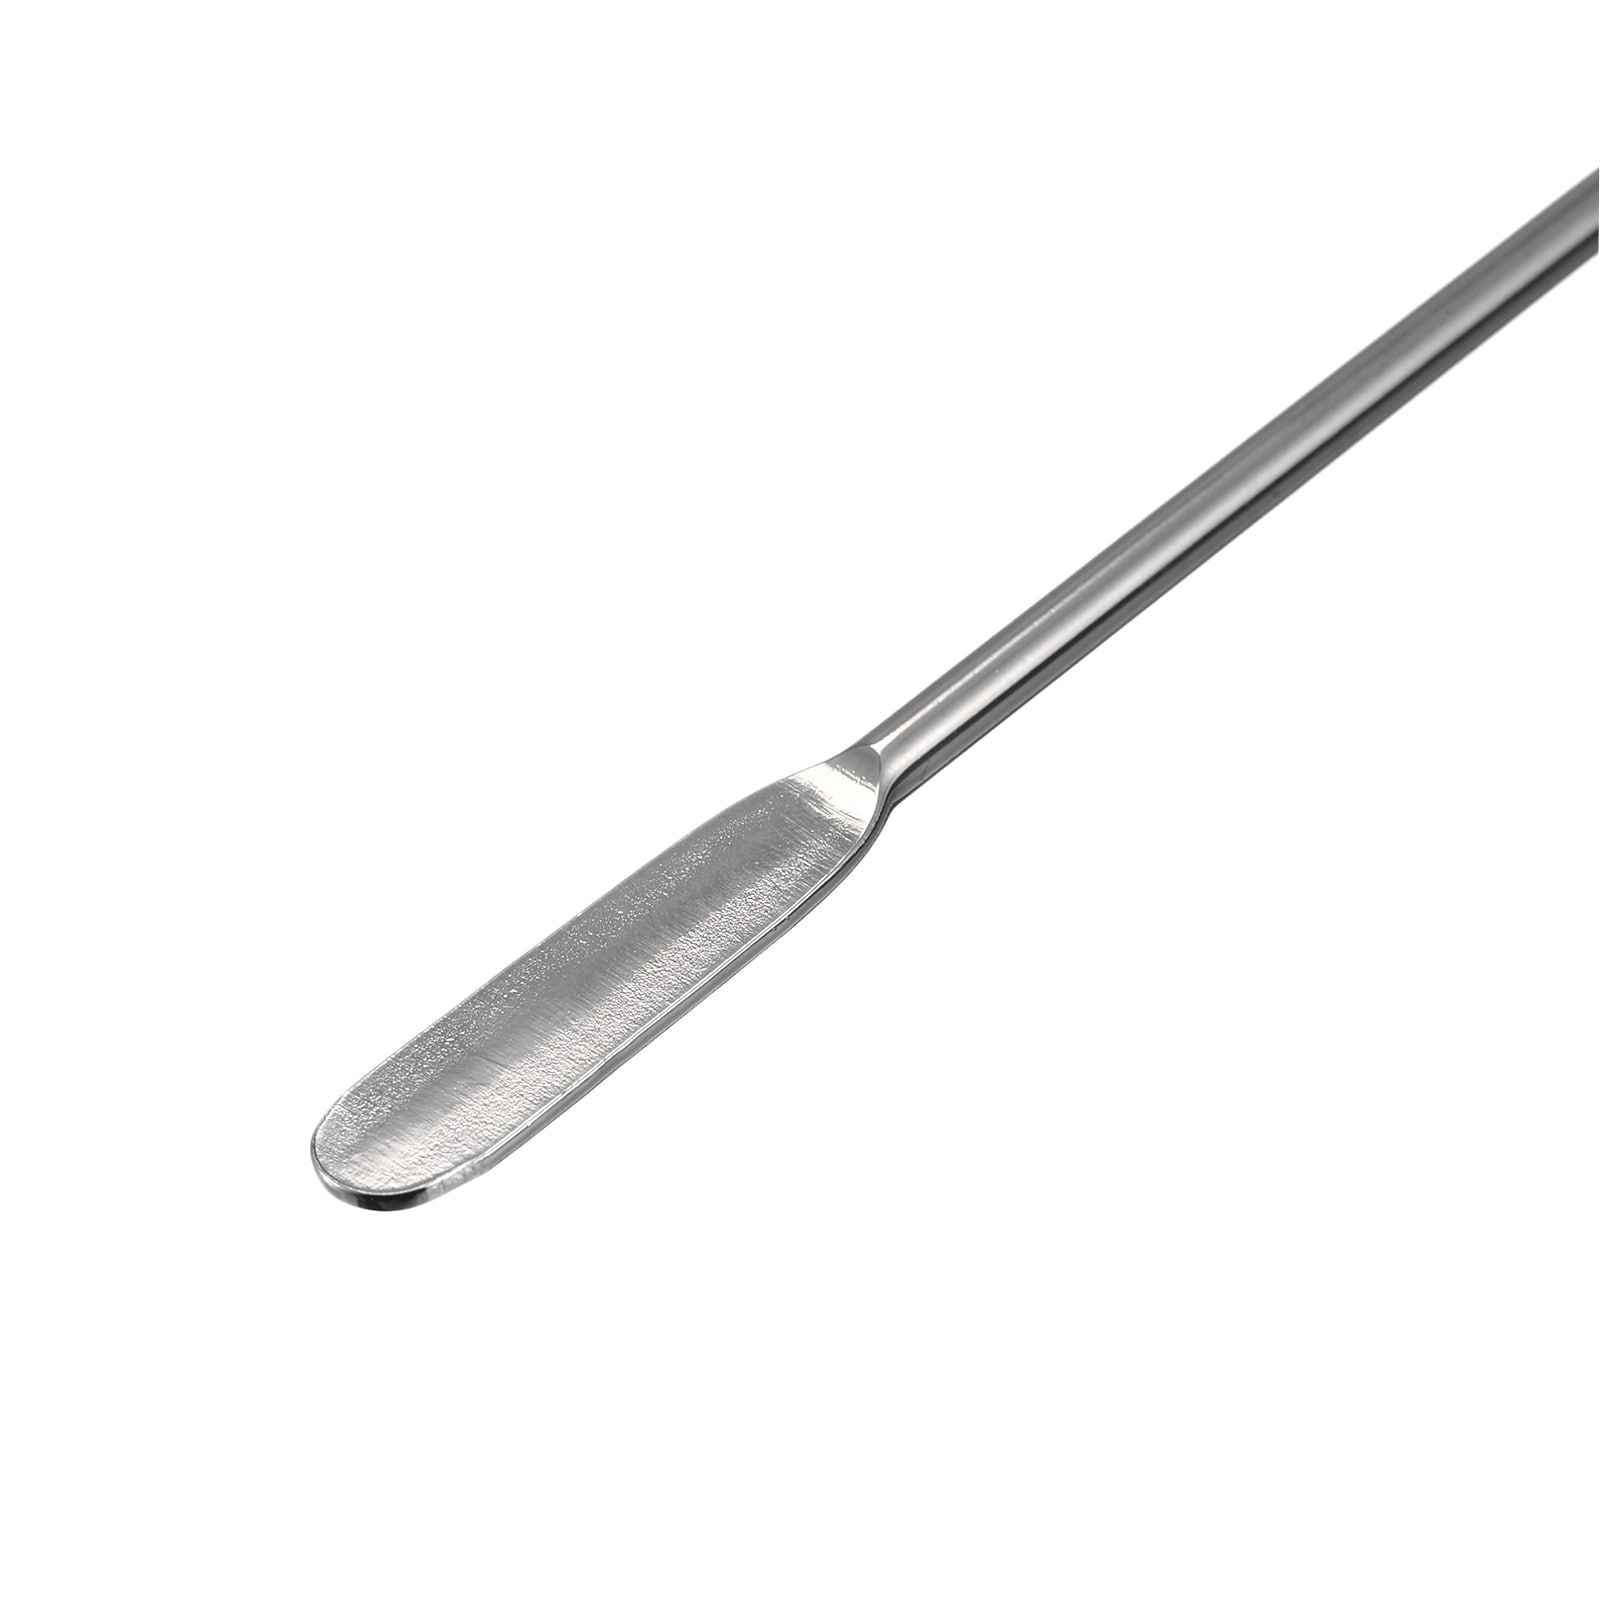 https://ak1.ostkcdn.com/images/products/is/images/direct/a6110311bd5fc7e1c1b771eb0eb10da540a58366/5pcs-Stainless-Steel-Coffee-Beverage-Stirrer-Cocktail-Drink-Stir-Stick%2C-Silver.jpg